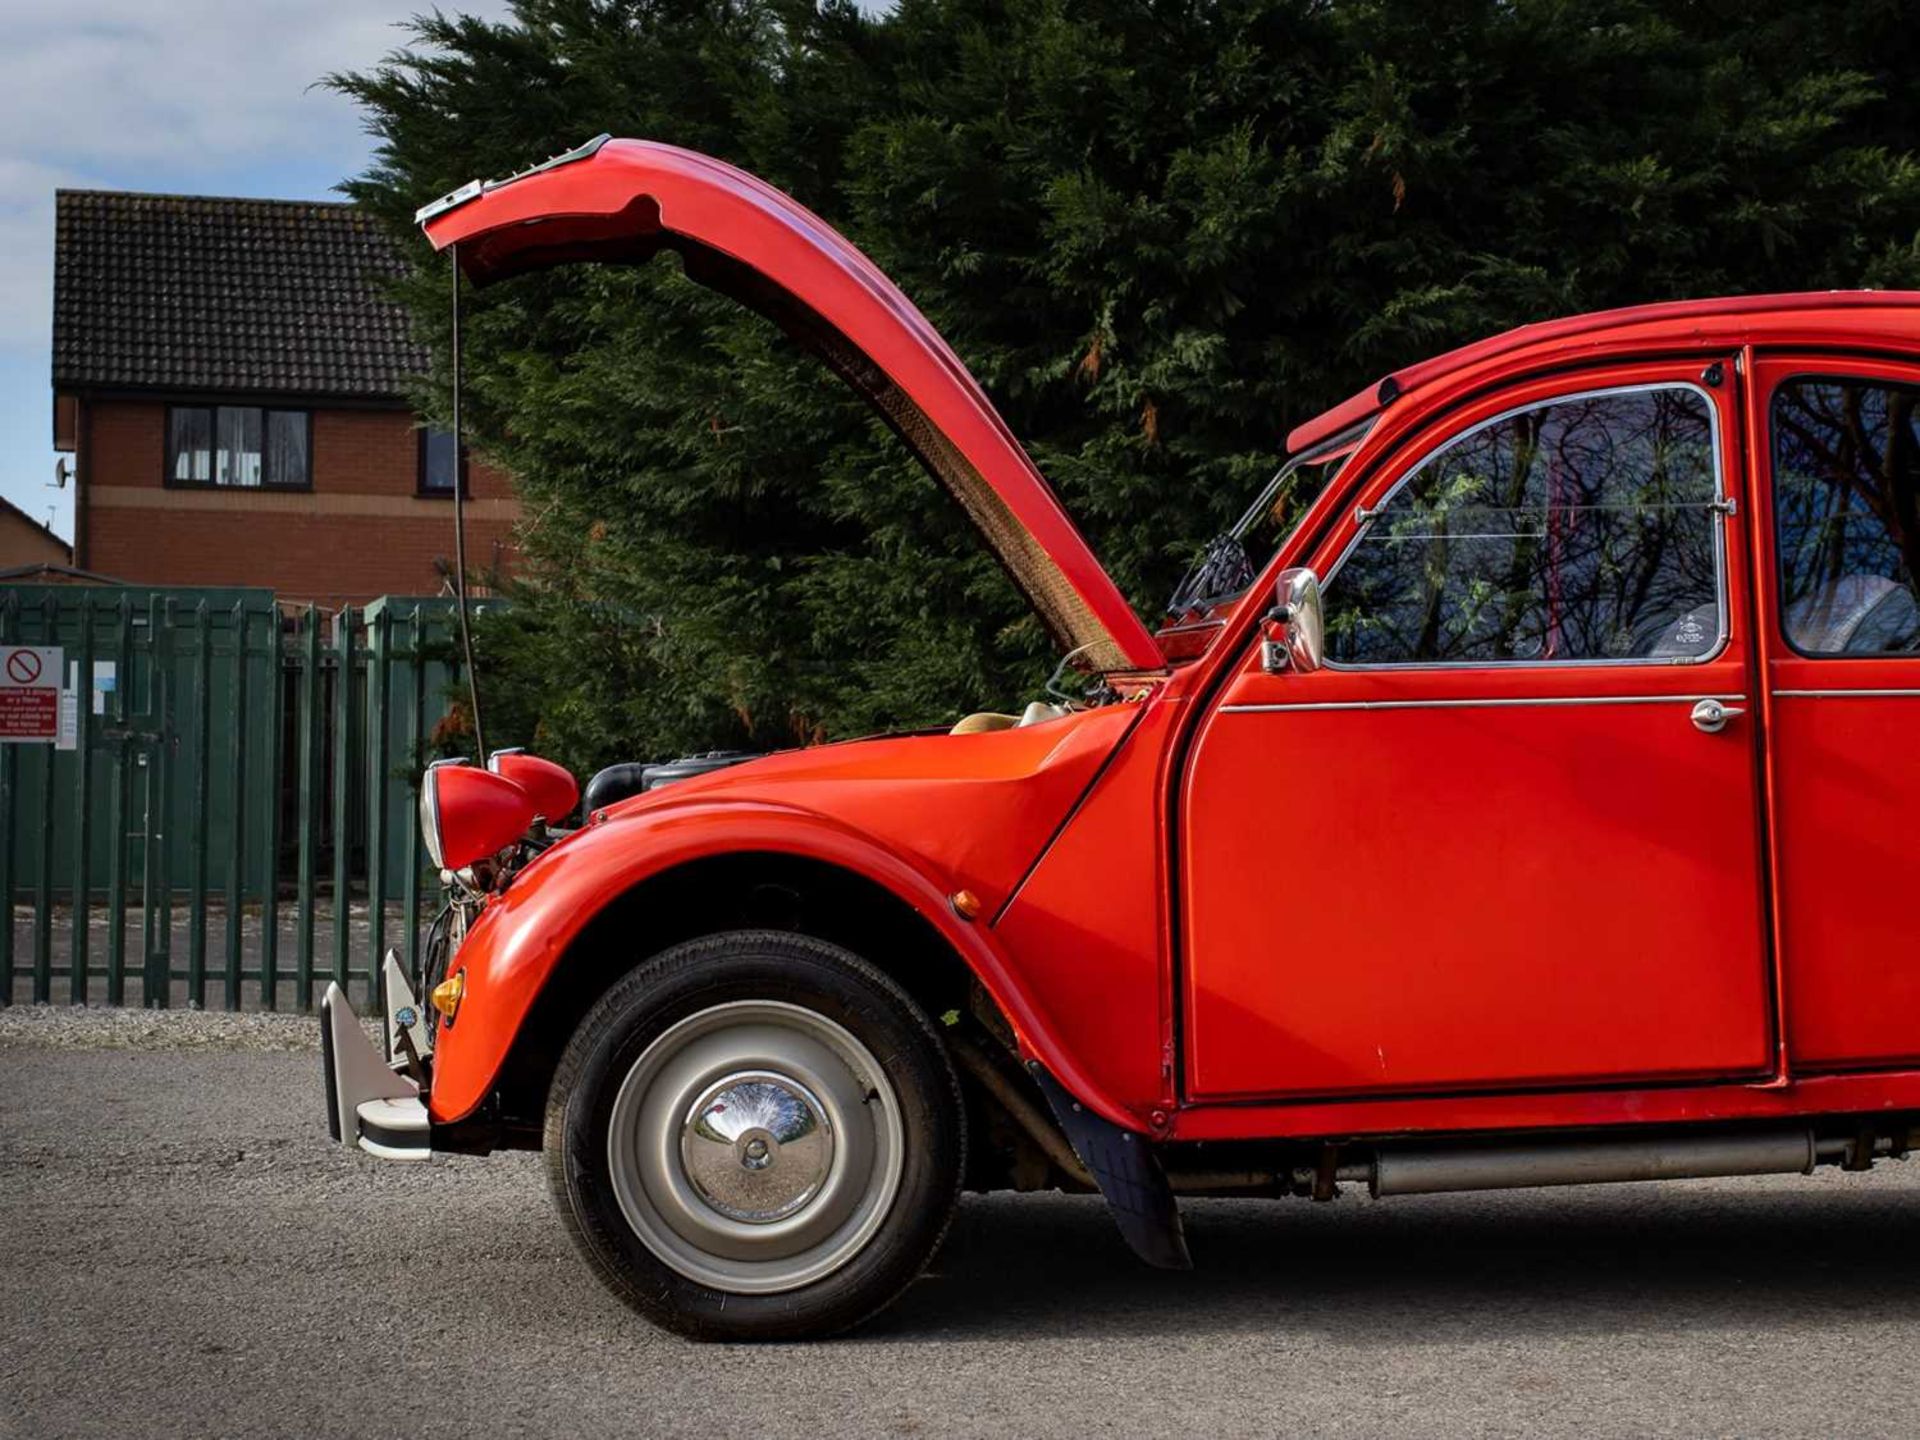 1989 Citroën 2CV6 Spécial Believed to have covered a credible 15,000 miles - Image 15 of 113